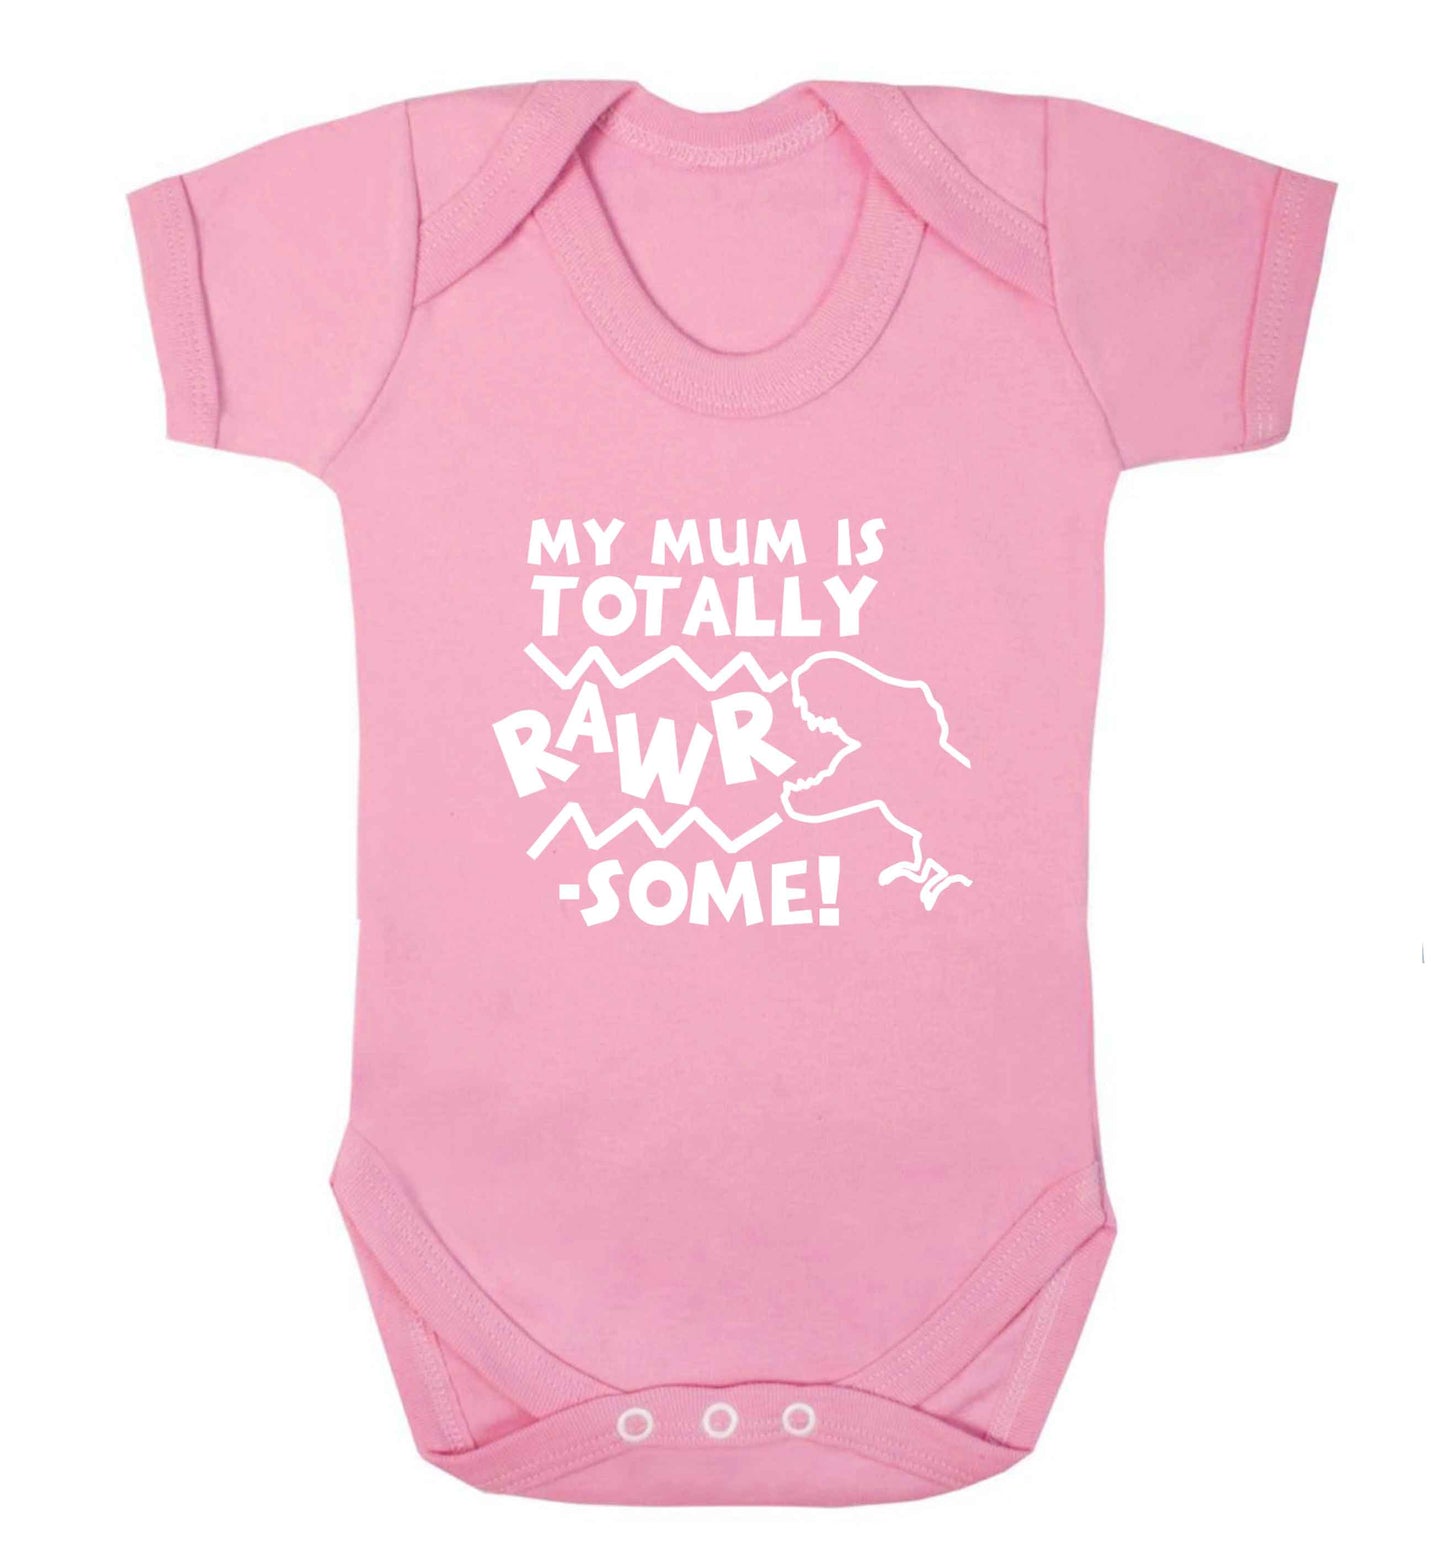 My mum is totally rawrsome baby vest pale pink 18-24 months